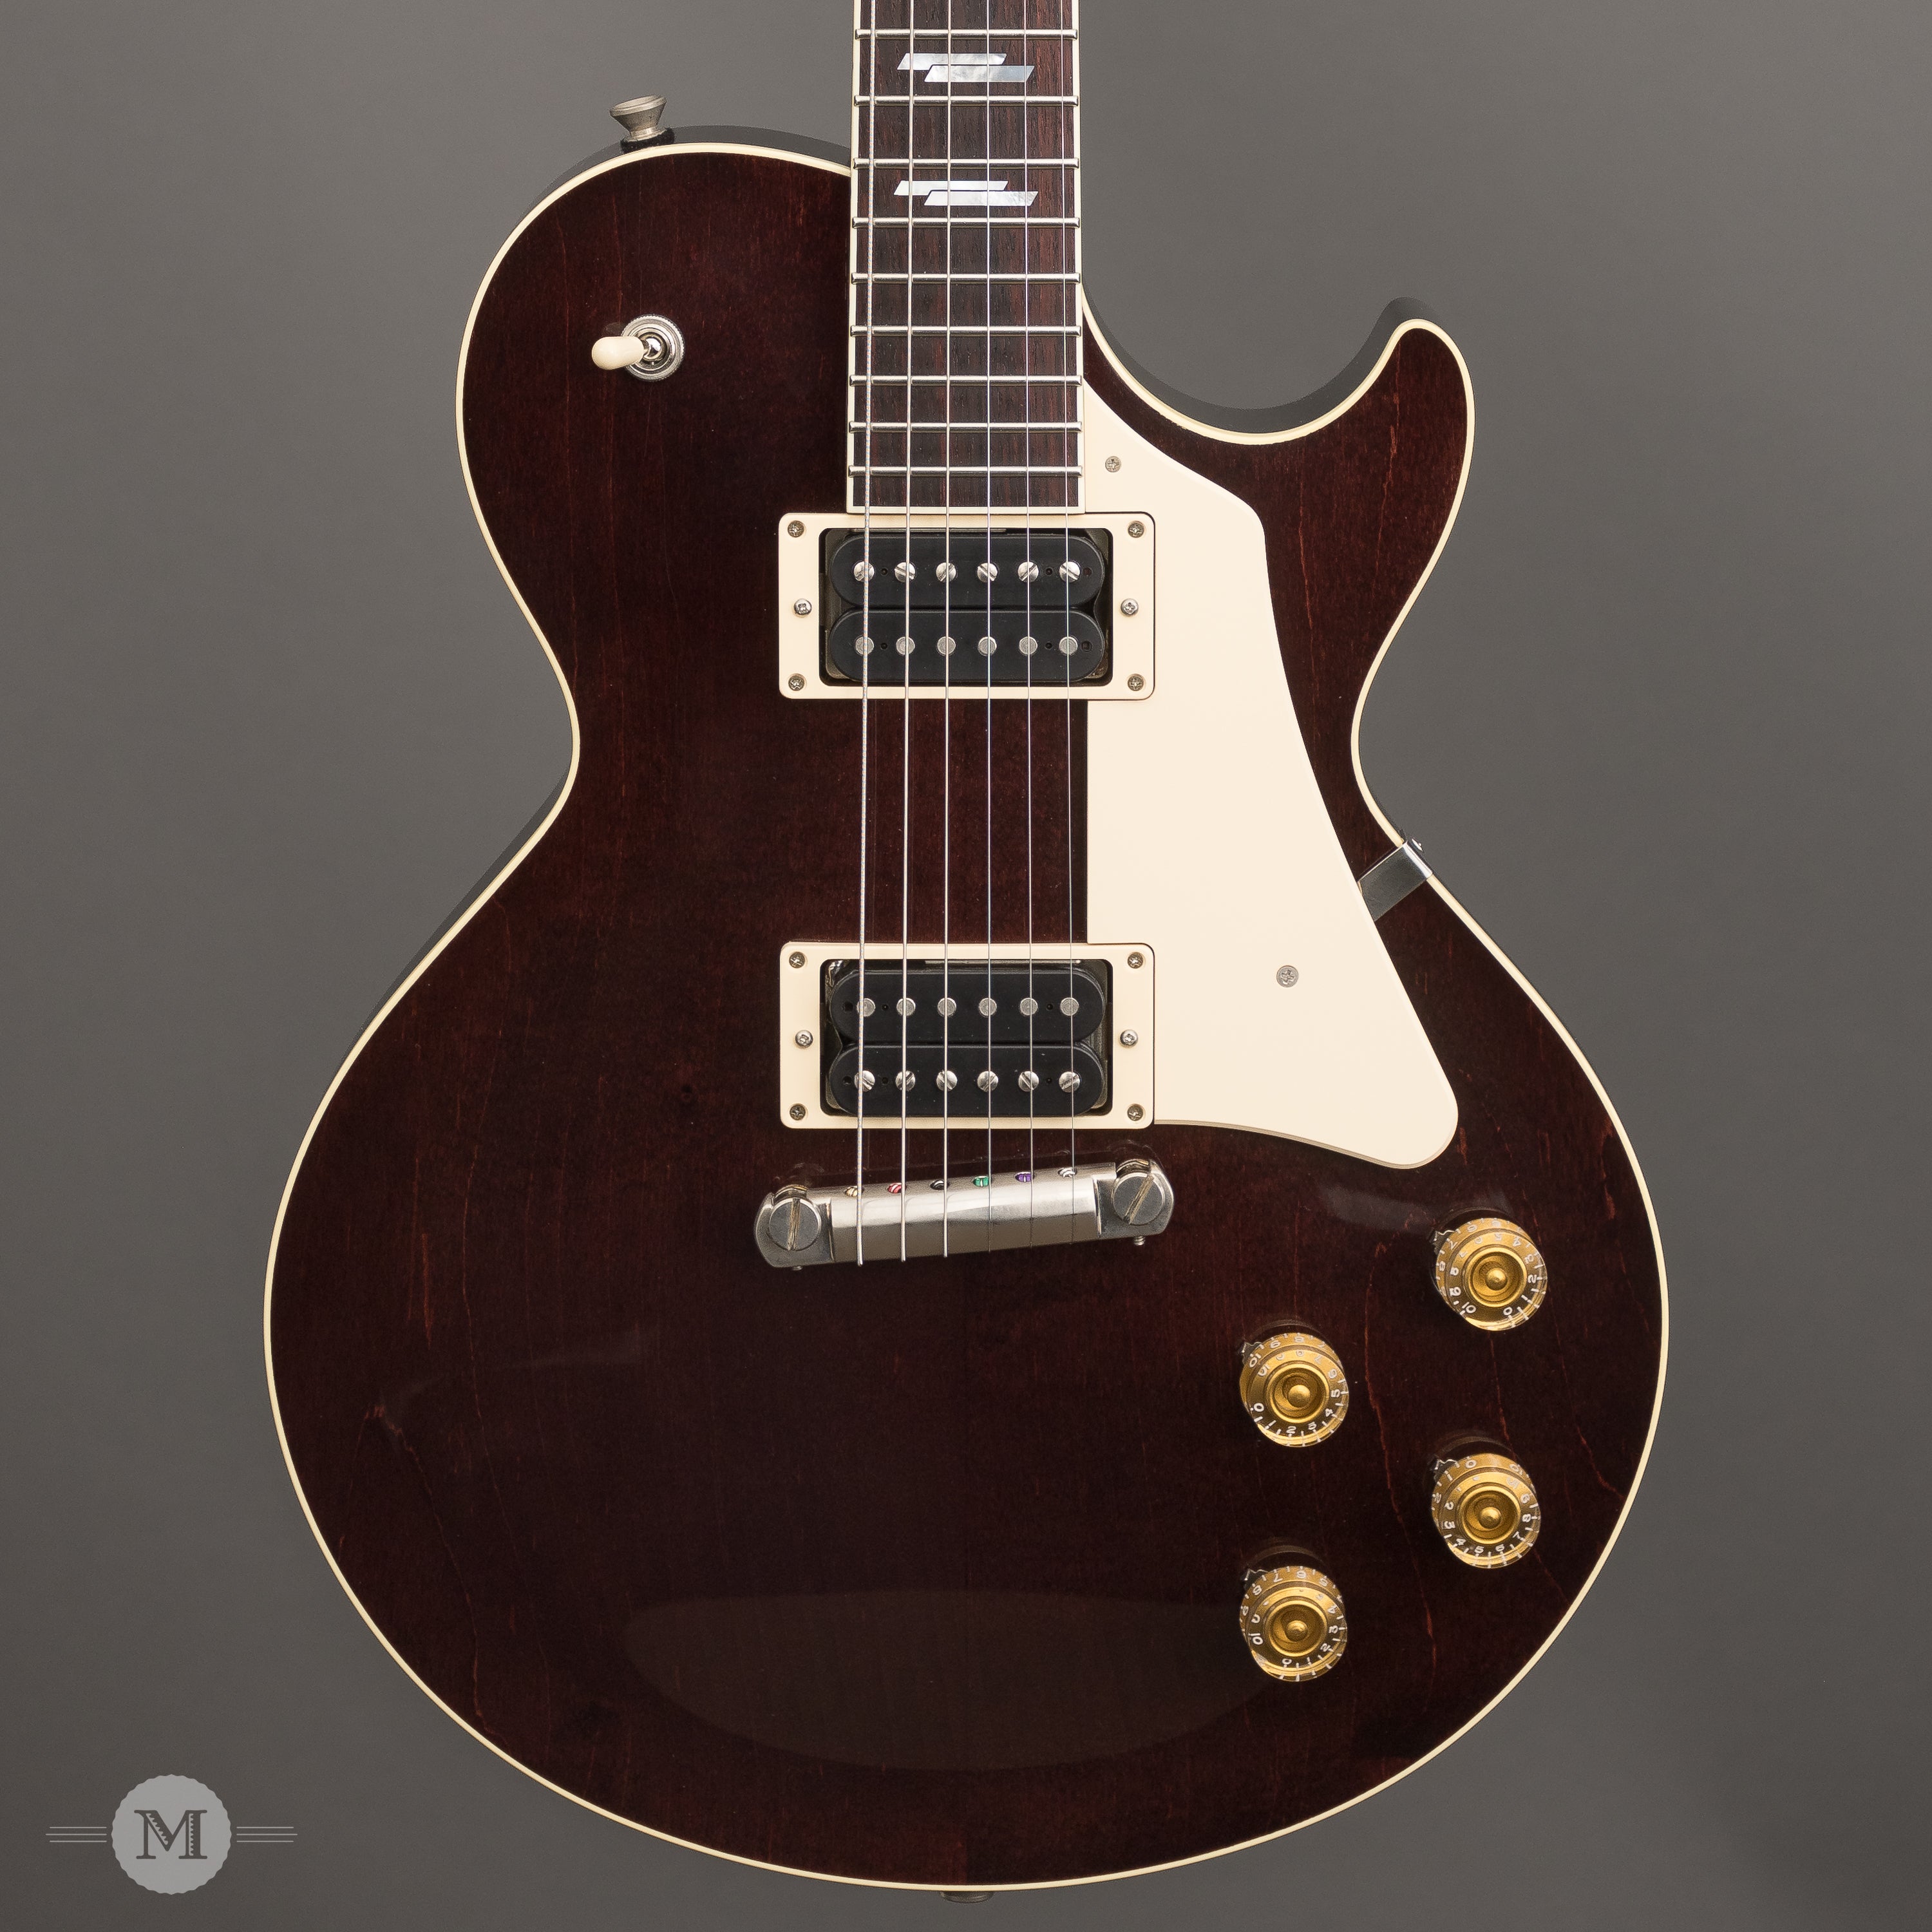 Collings Electric Guitars - City Limits - Oxblood - Aged Finish